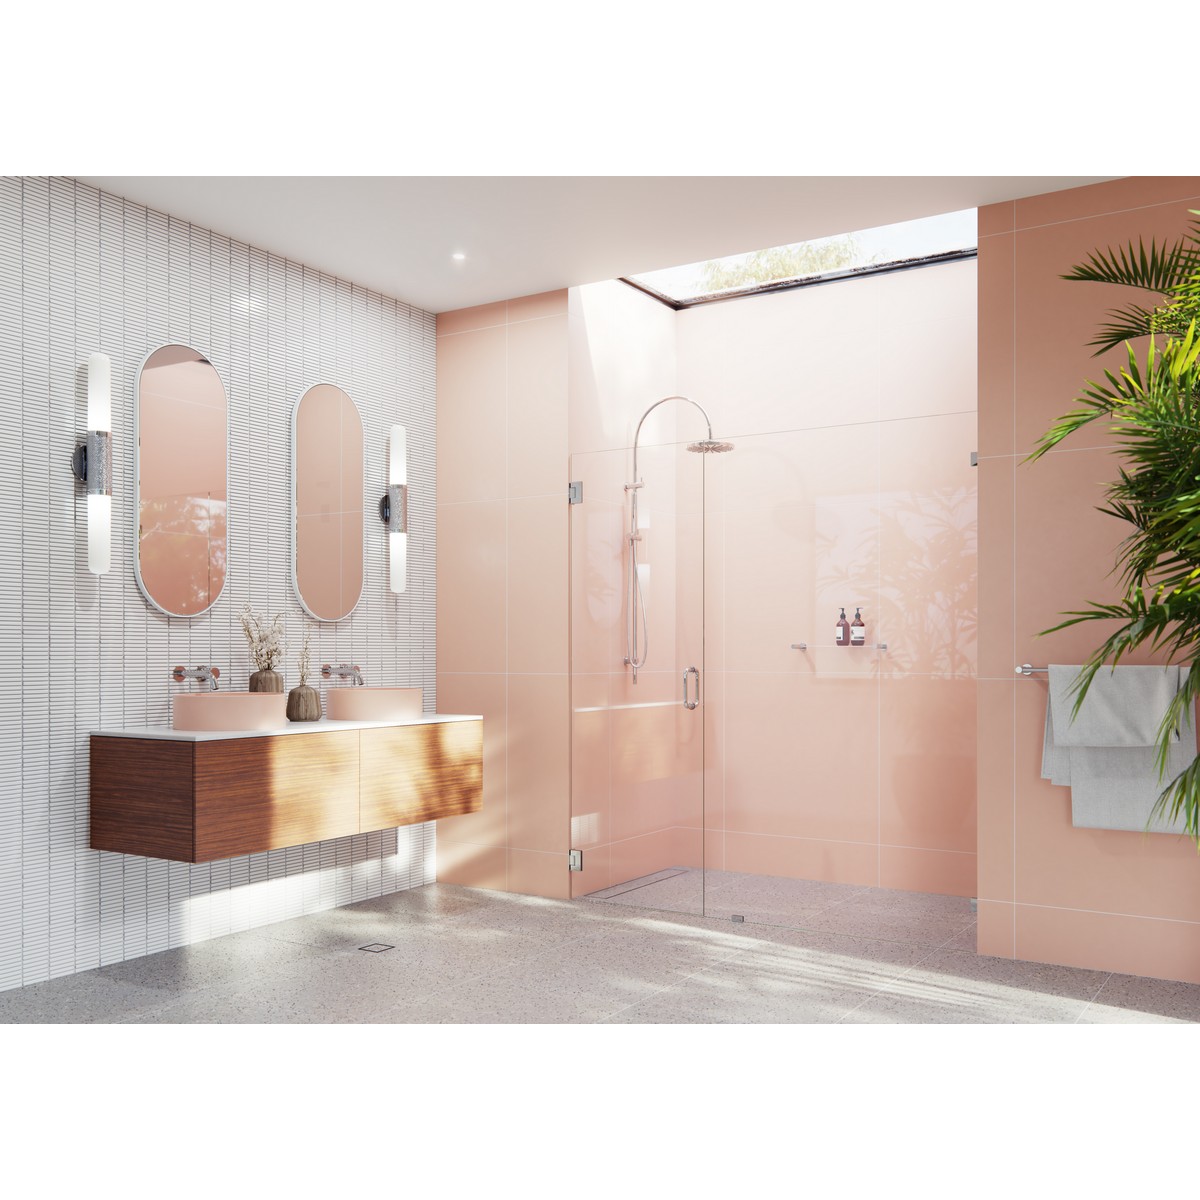 GLASS WAREHOUSE GW-WH-77 ILLUME 77 W X 78 H WALL HINGED FULLY FRAMELESS GLASS SHOWER ENCLOSURE